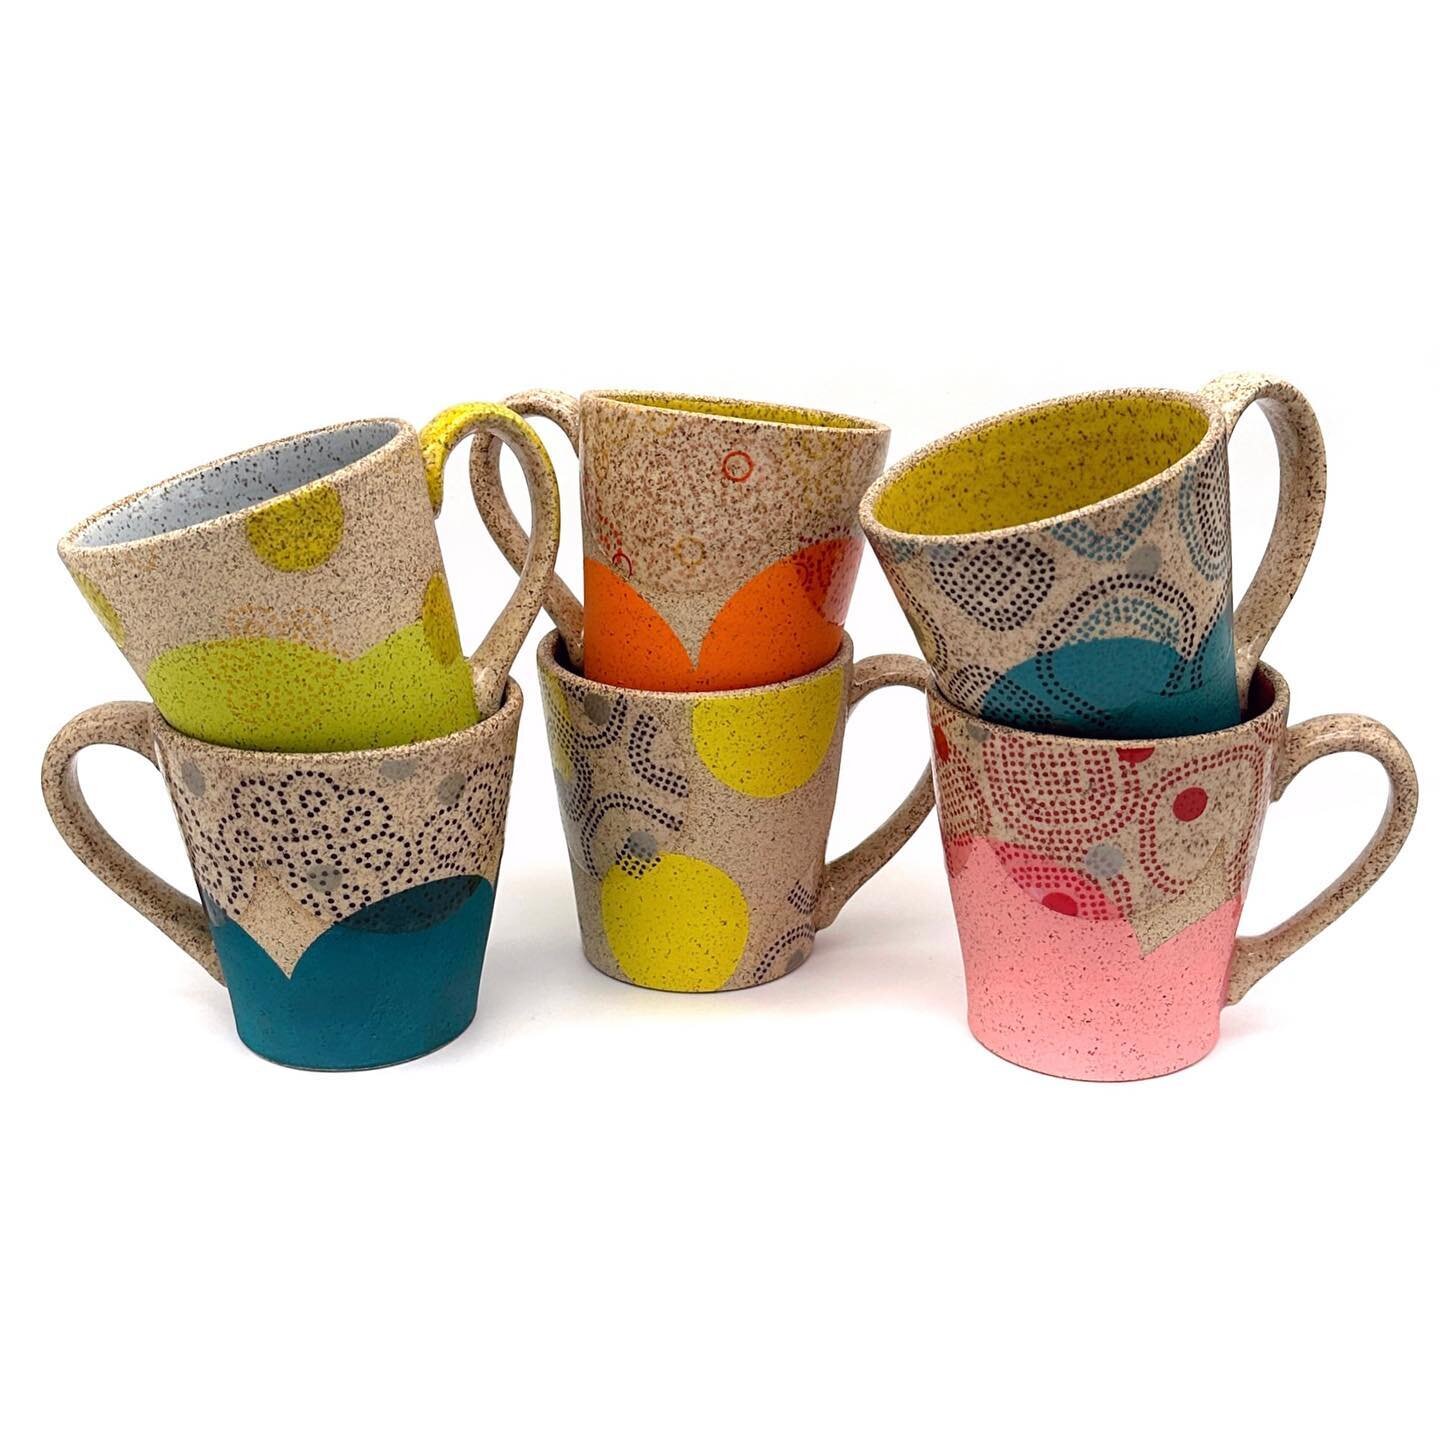 Mugs! Speckled and Dotted. 
I&rsquo;ll have these at the @kcurbanpotters Gallery Expo Booth at nceca next week! March 14-17 at Duke Energy Convention Center in Cincinnati, OH. The Expo opens Tuesday evening and runs through Friday. You do NOT need a 